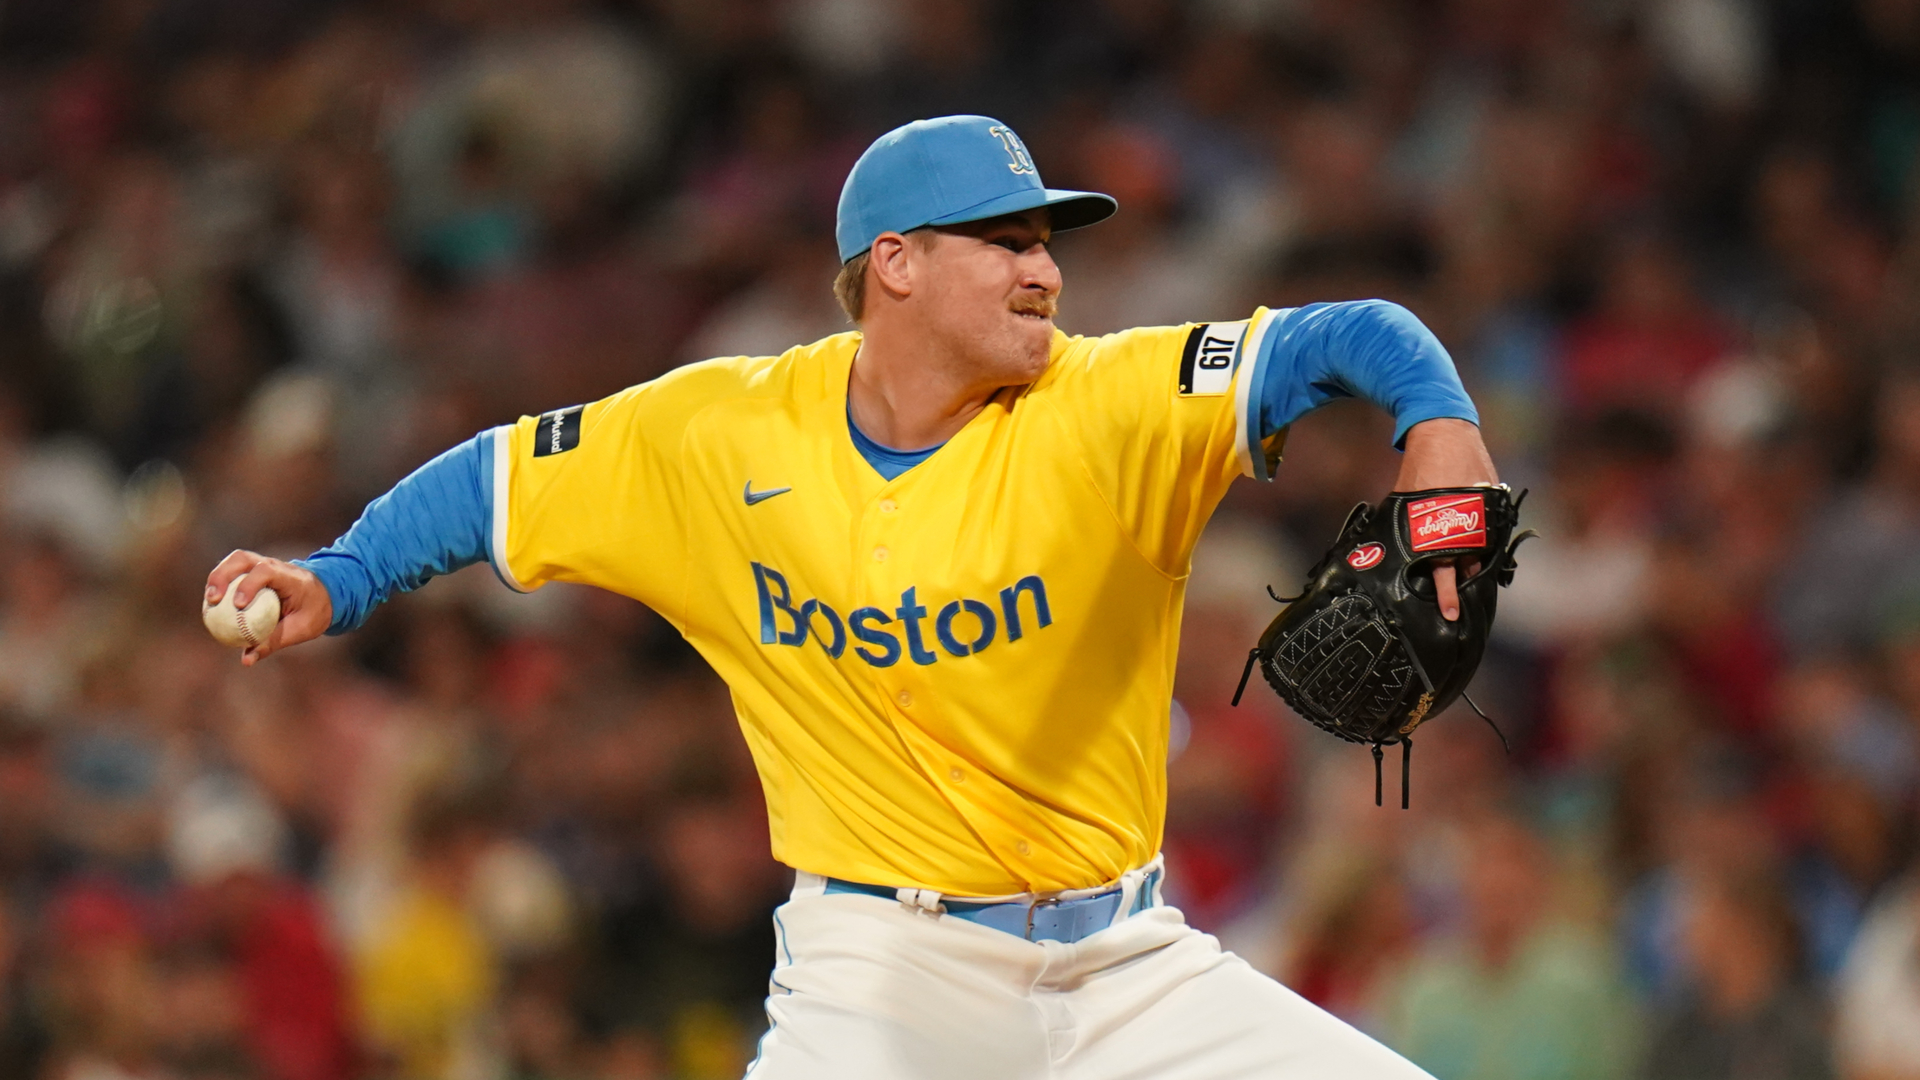 Red' Sox to don yellow and blue uniforms this month